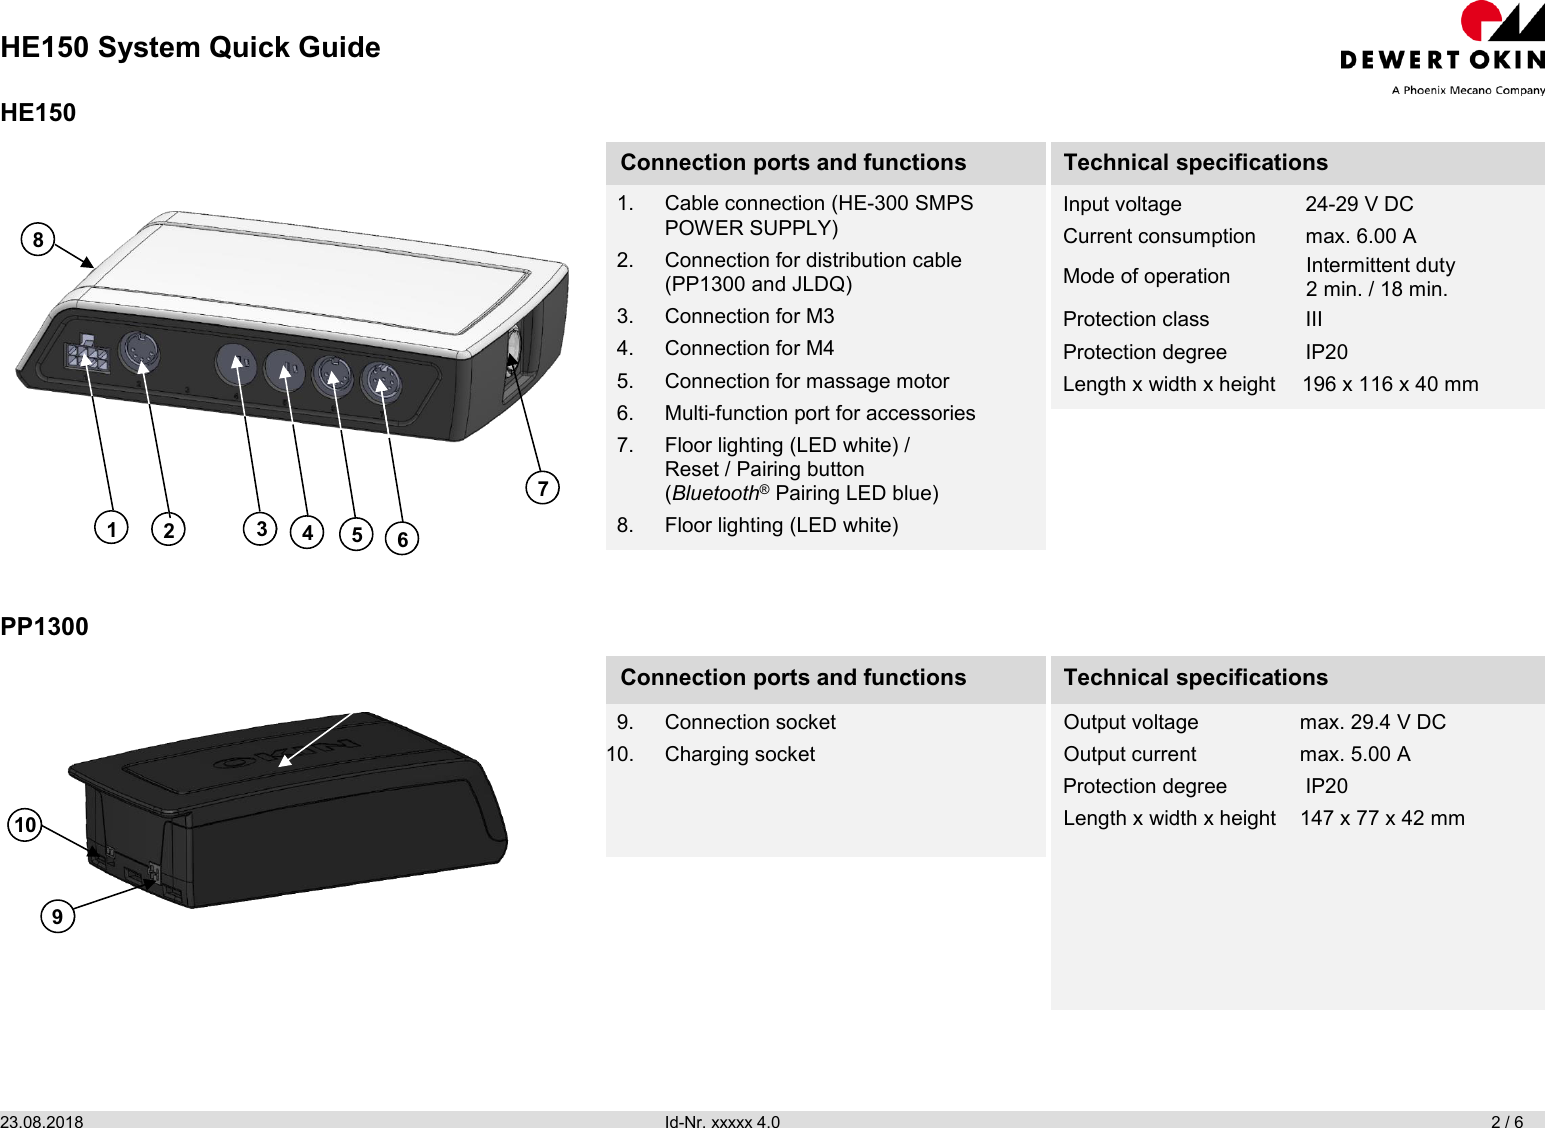 HE150 System Quick Guide 23.08.2018                Id-Nr. xxxxx 4.0                       2 / 6   HE150  Connection ports and functions  Technical specifications 1.  Cable connection (HE-300 SMPS POWER SUPPLY) 2.  Connection for distribution cable (PP1300 and JLDQ) 3.  Connection for M3  4.  Connection for M4 5.  Connection for massage motor 6.  Multi-function port for accessories 7.  Floor lighting (LED white) /  Reset / Pairing button (Bluetooth® Pairing LED blue) 8.  Floor lighting (LED white) Input voltage  24-29 V DC Current consumption   max. 6.00 A Mode of operation Protection class    III Protection degree    IP20 Length x width x height  196 x 116 x 40 mm  PP1300  Connection ports and functions Technical specifications 9.  Connection socket 10.  Charging socket Output voltage  max. 29.4 V DC Output current  max. 5.00 A Protection degree    IP20 Length x width x height  147 x 77 x 42 mm   1 3 4 5 6 2 8 7 Intermittent duty 2 min. / 18 min. 910 